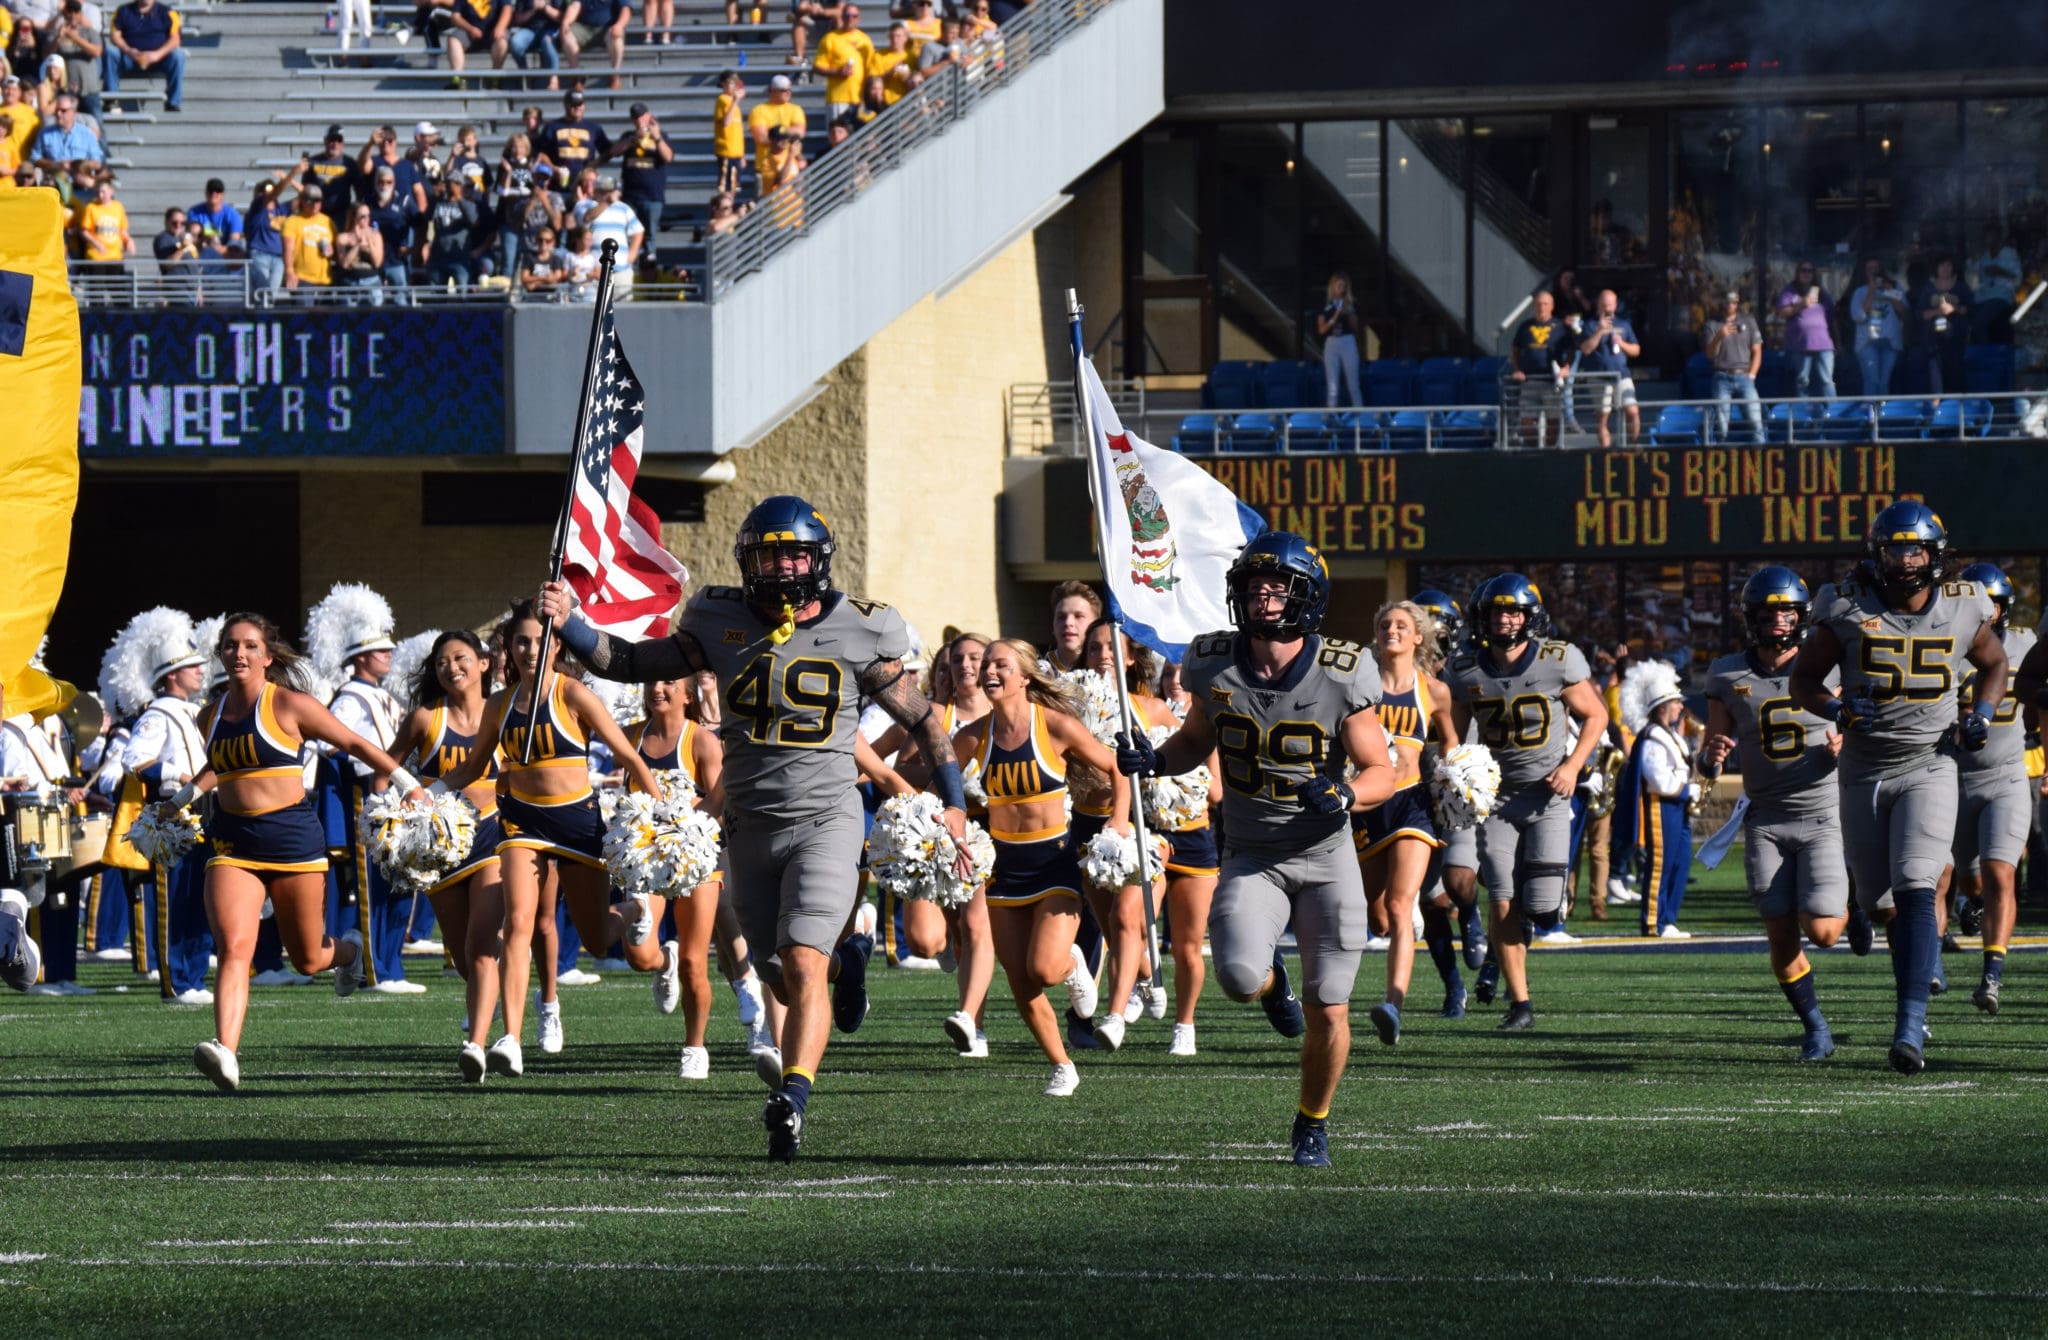 WVU football with US and WV flag